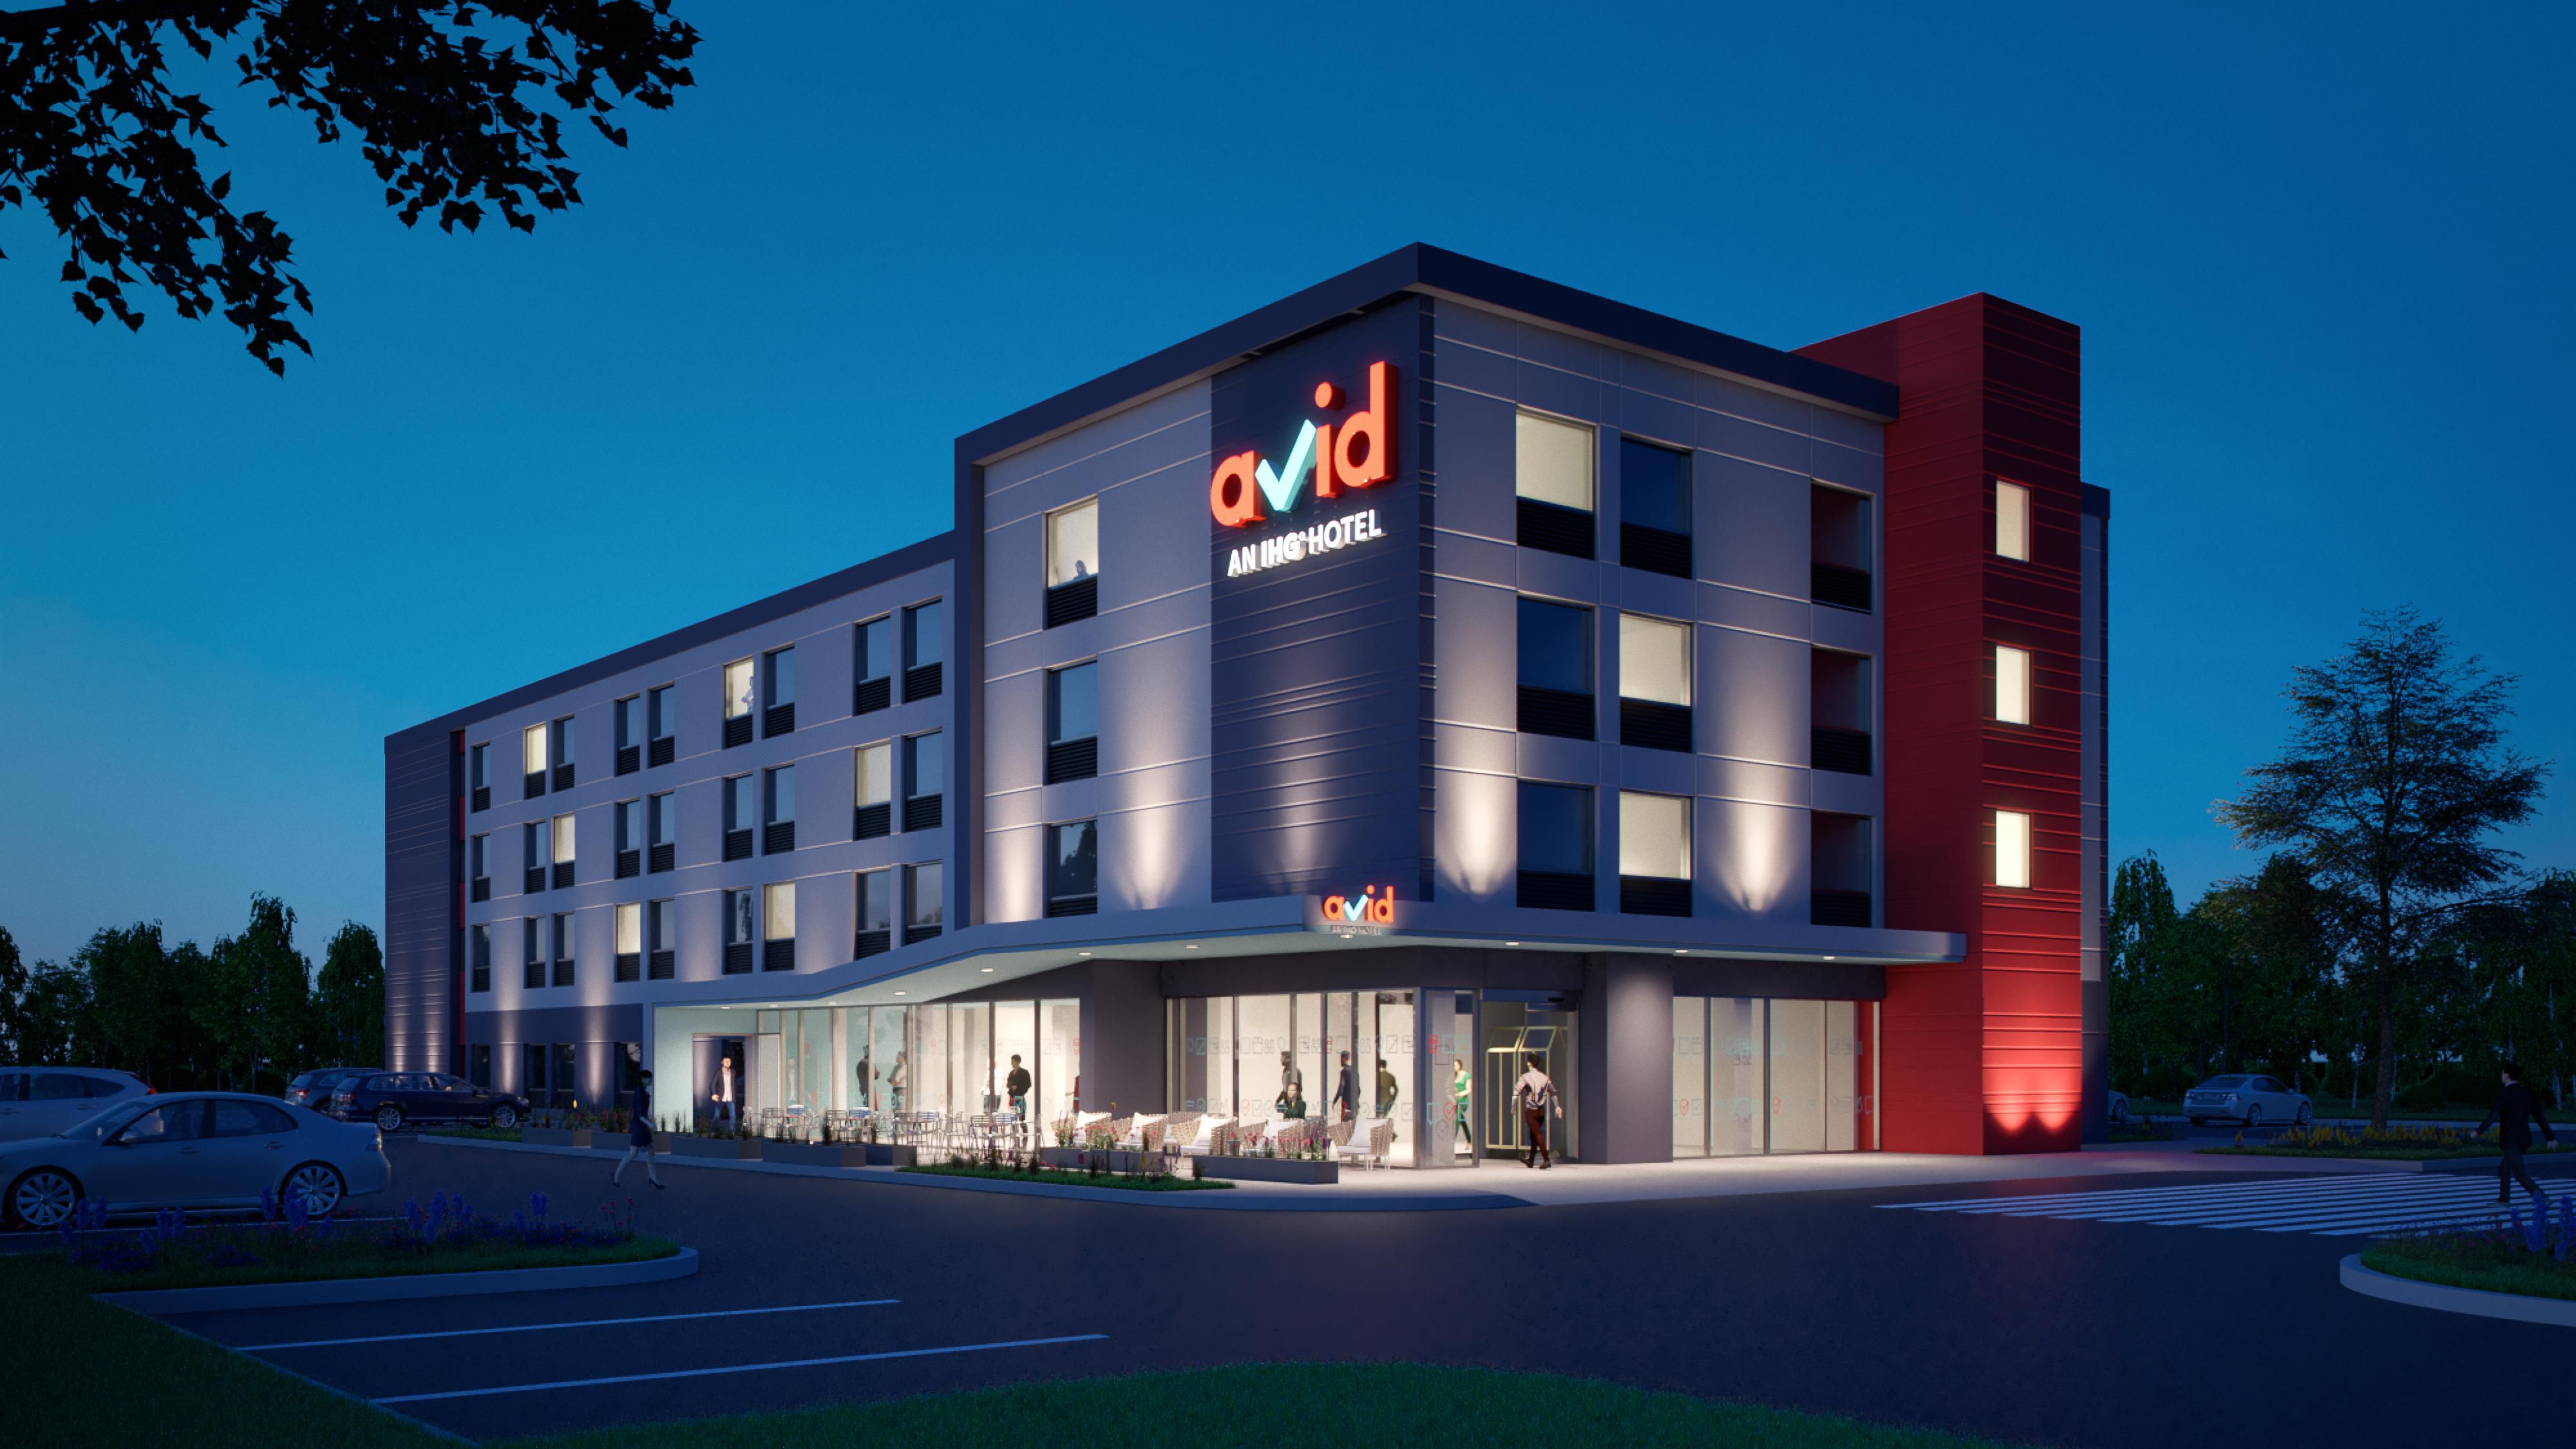 Avid Hotels West Chester 6504009892 16x9